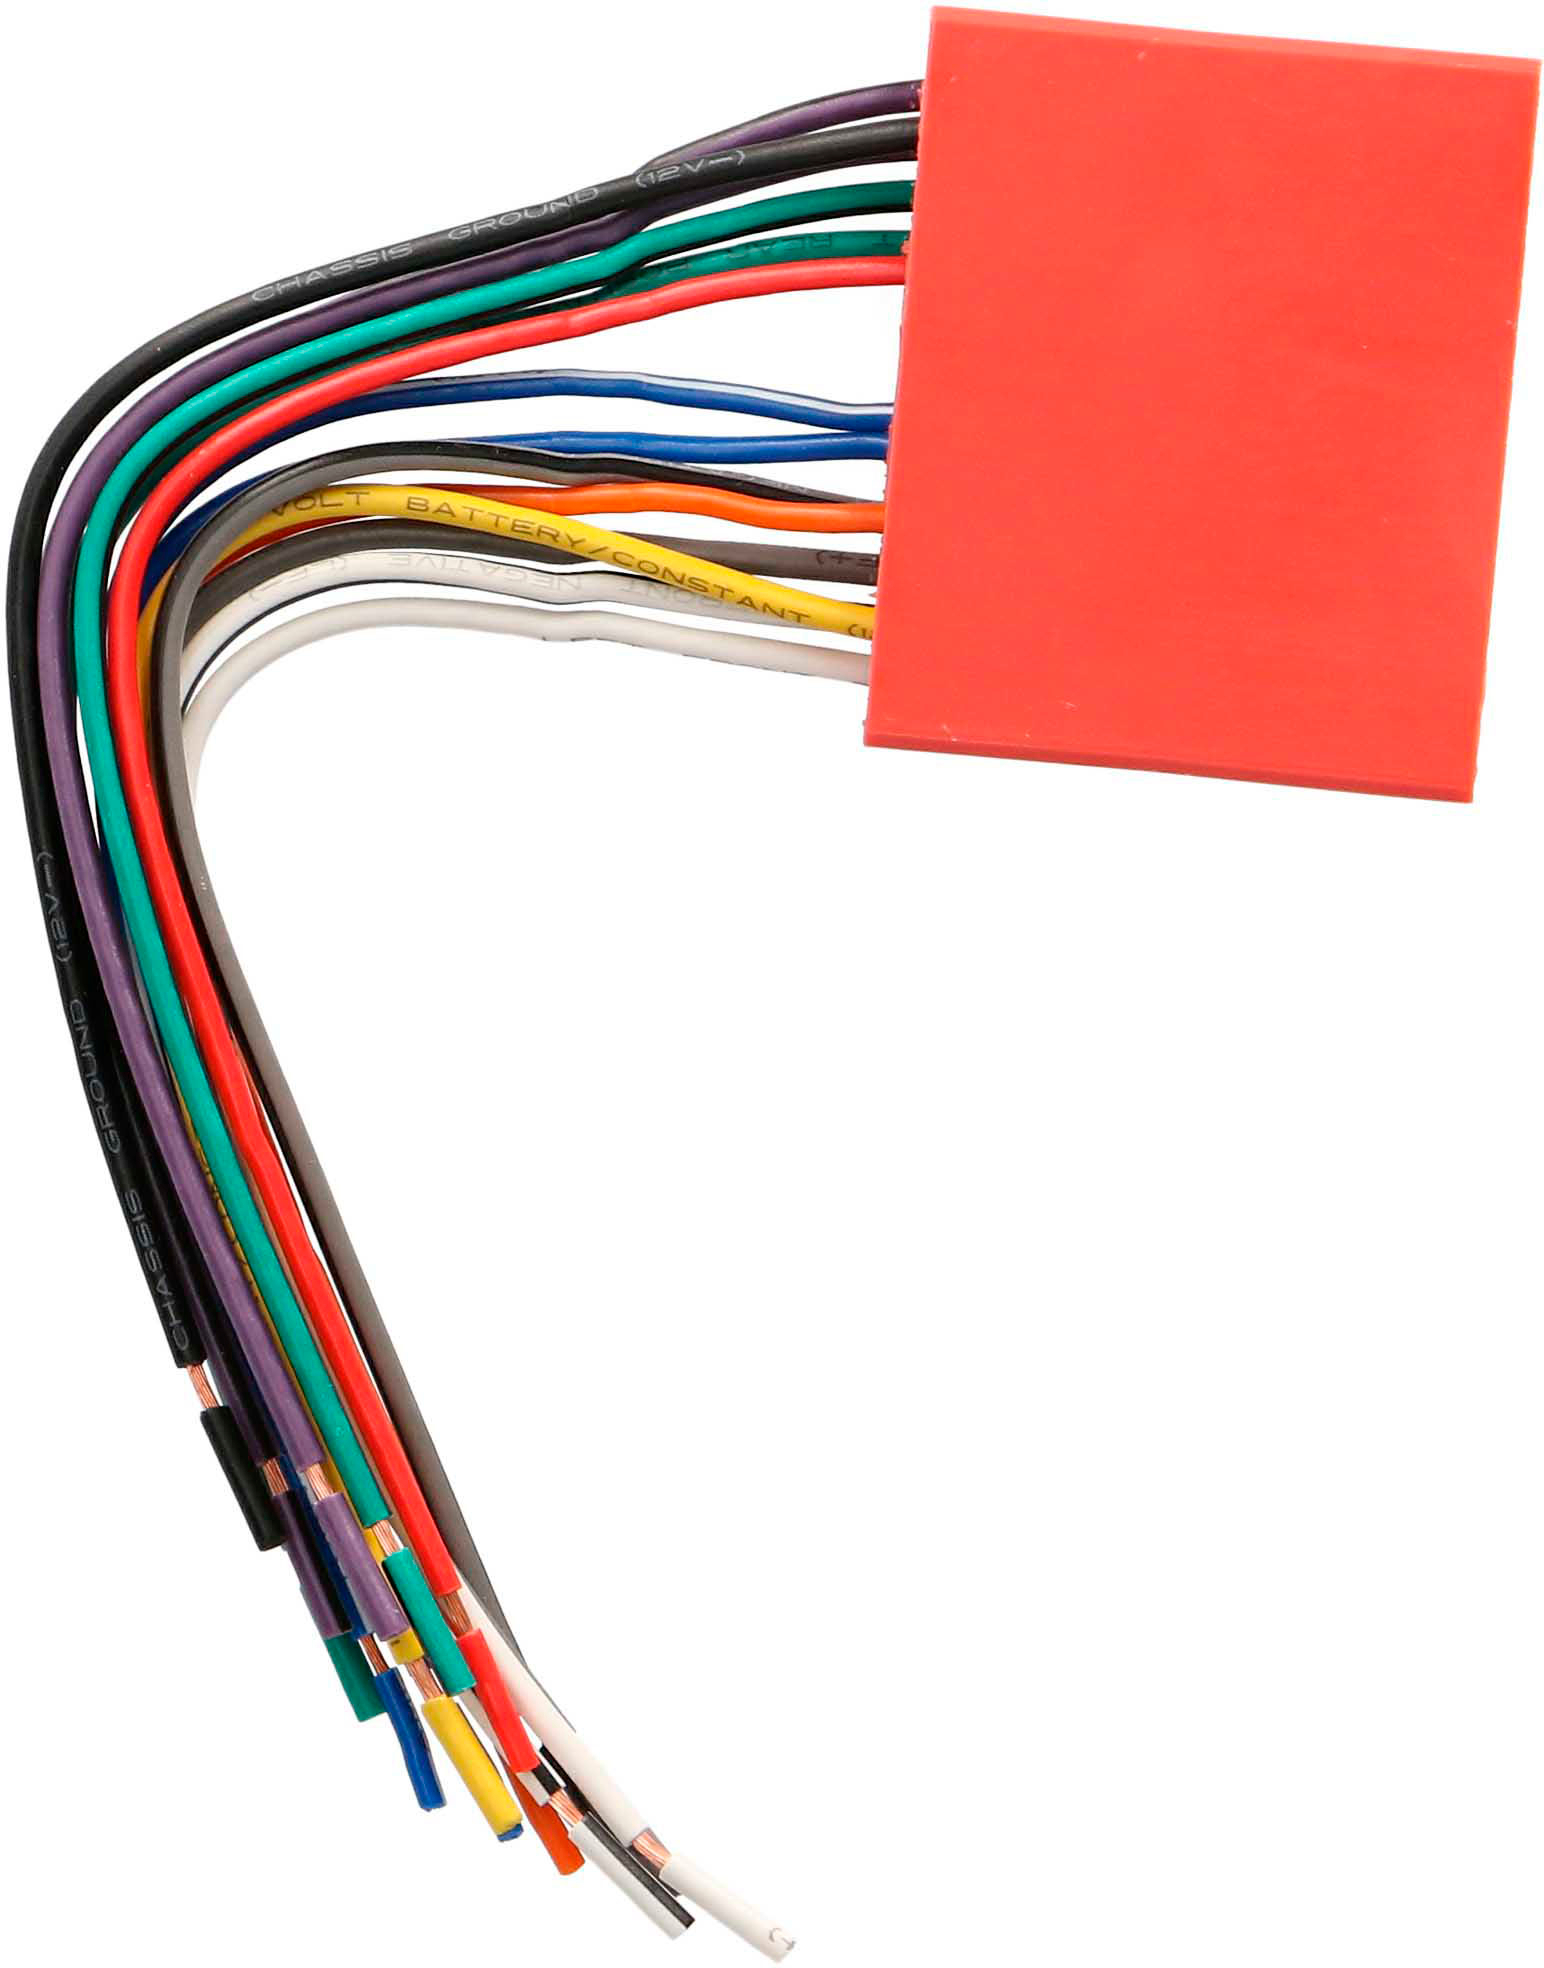 Angle View: Metra - Wiring Harness for Select 2001-Up Mazda - Multi